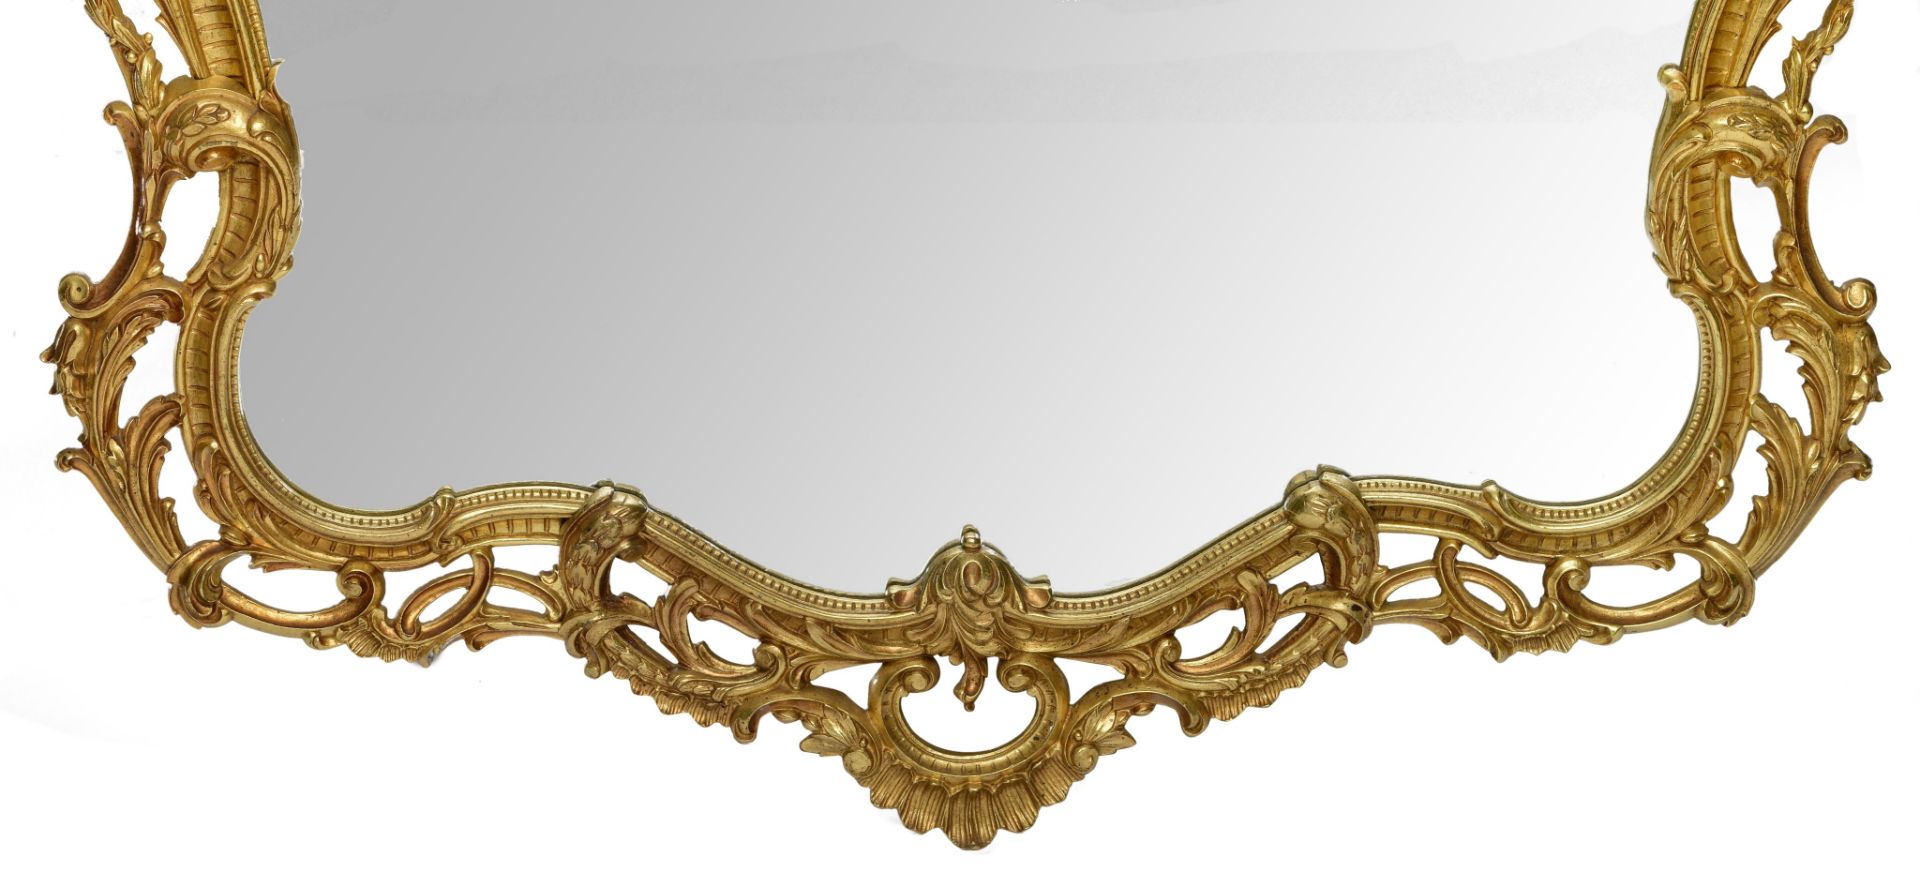 A large Rococo style gilt metal console table and mirror, H 125 - W 110 cm (the mirror) - H 85 - W 1 - Image 12 of 12